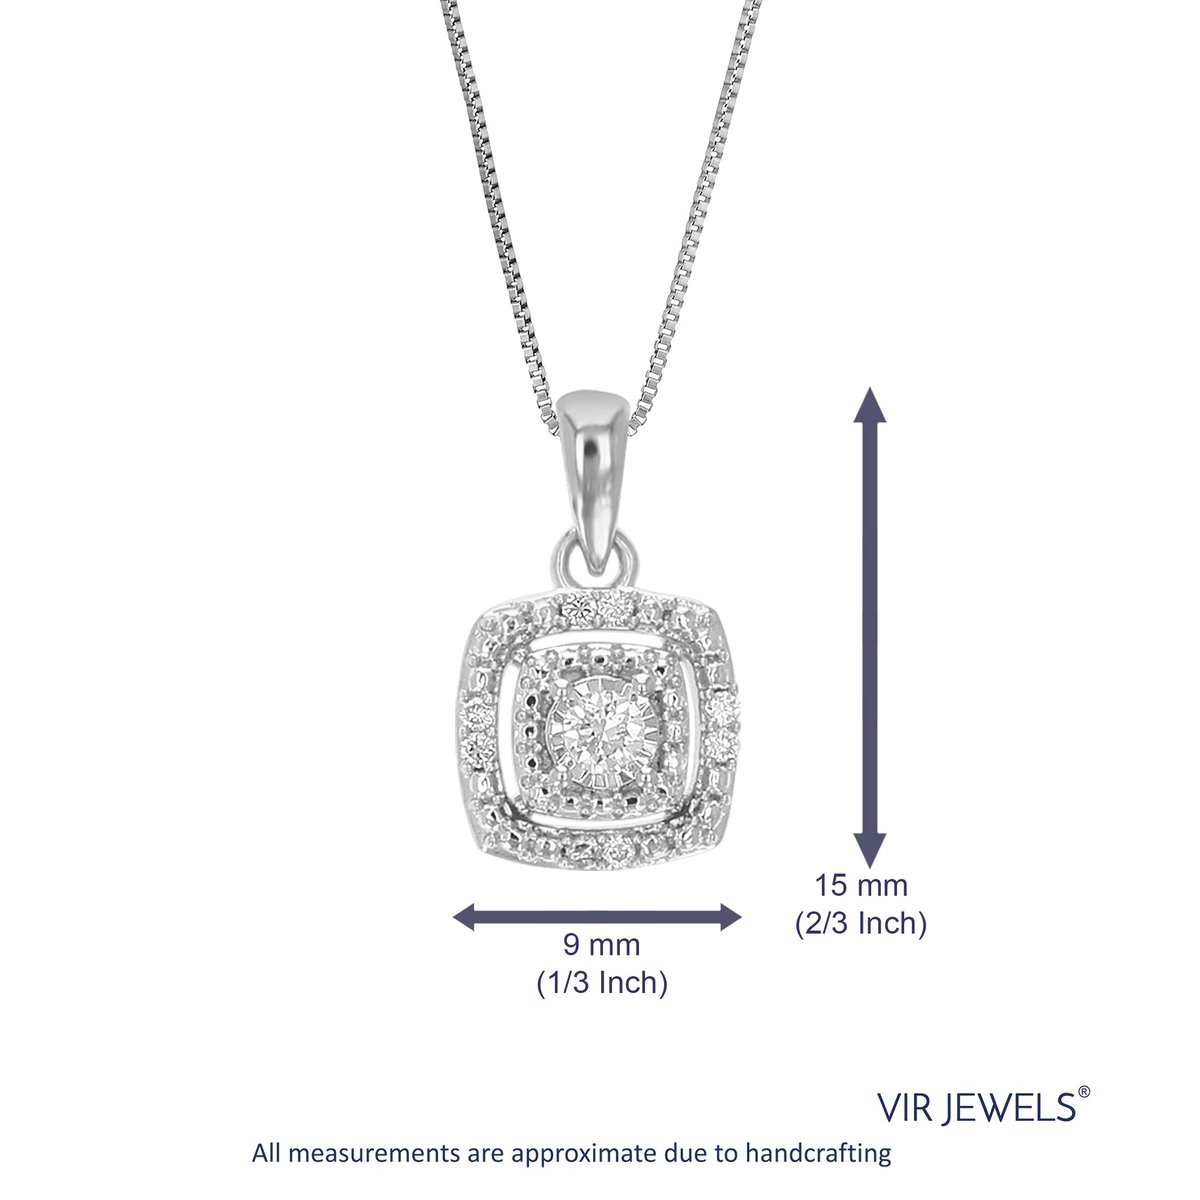 Vir Jewels 1/10 Cttw Diamond Pendant Necklace For Women, Lab Grown Diamond  Square Pendant Necklace In .925 Sterling Silver With Chain, Width 1/3